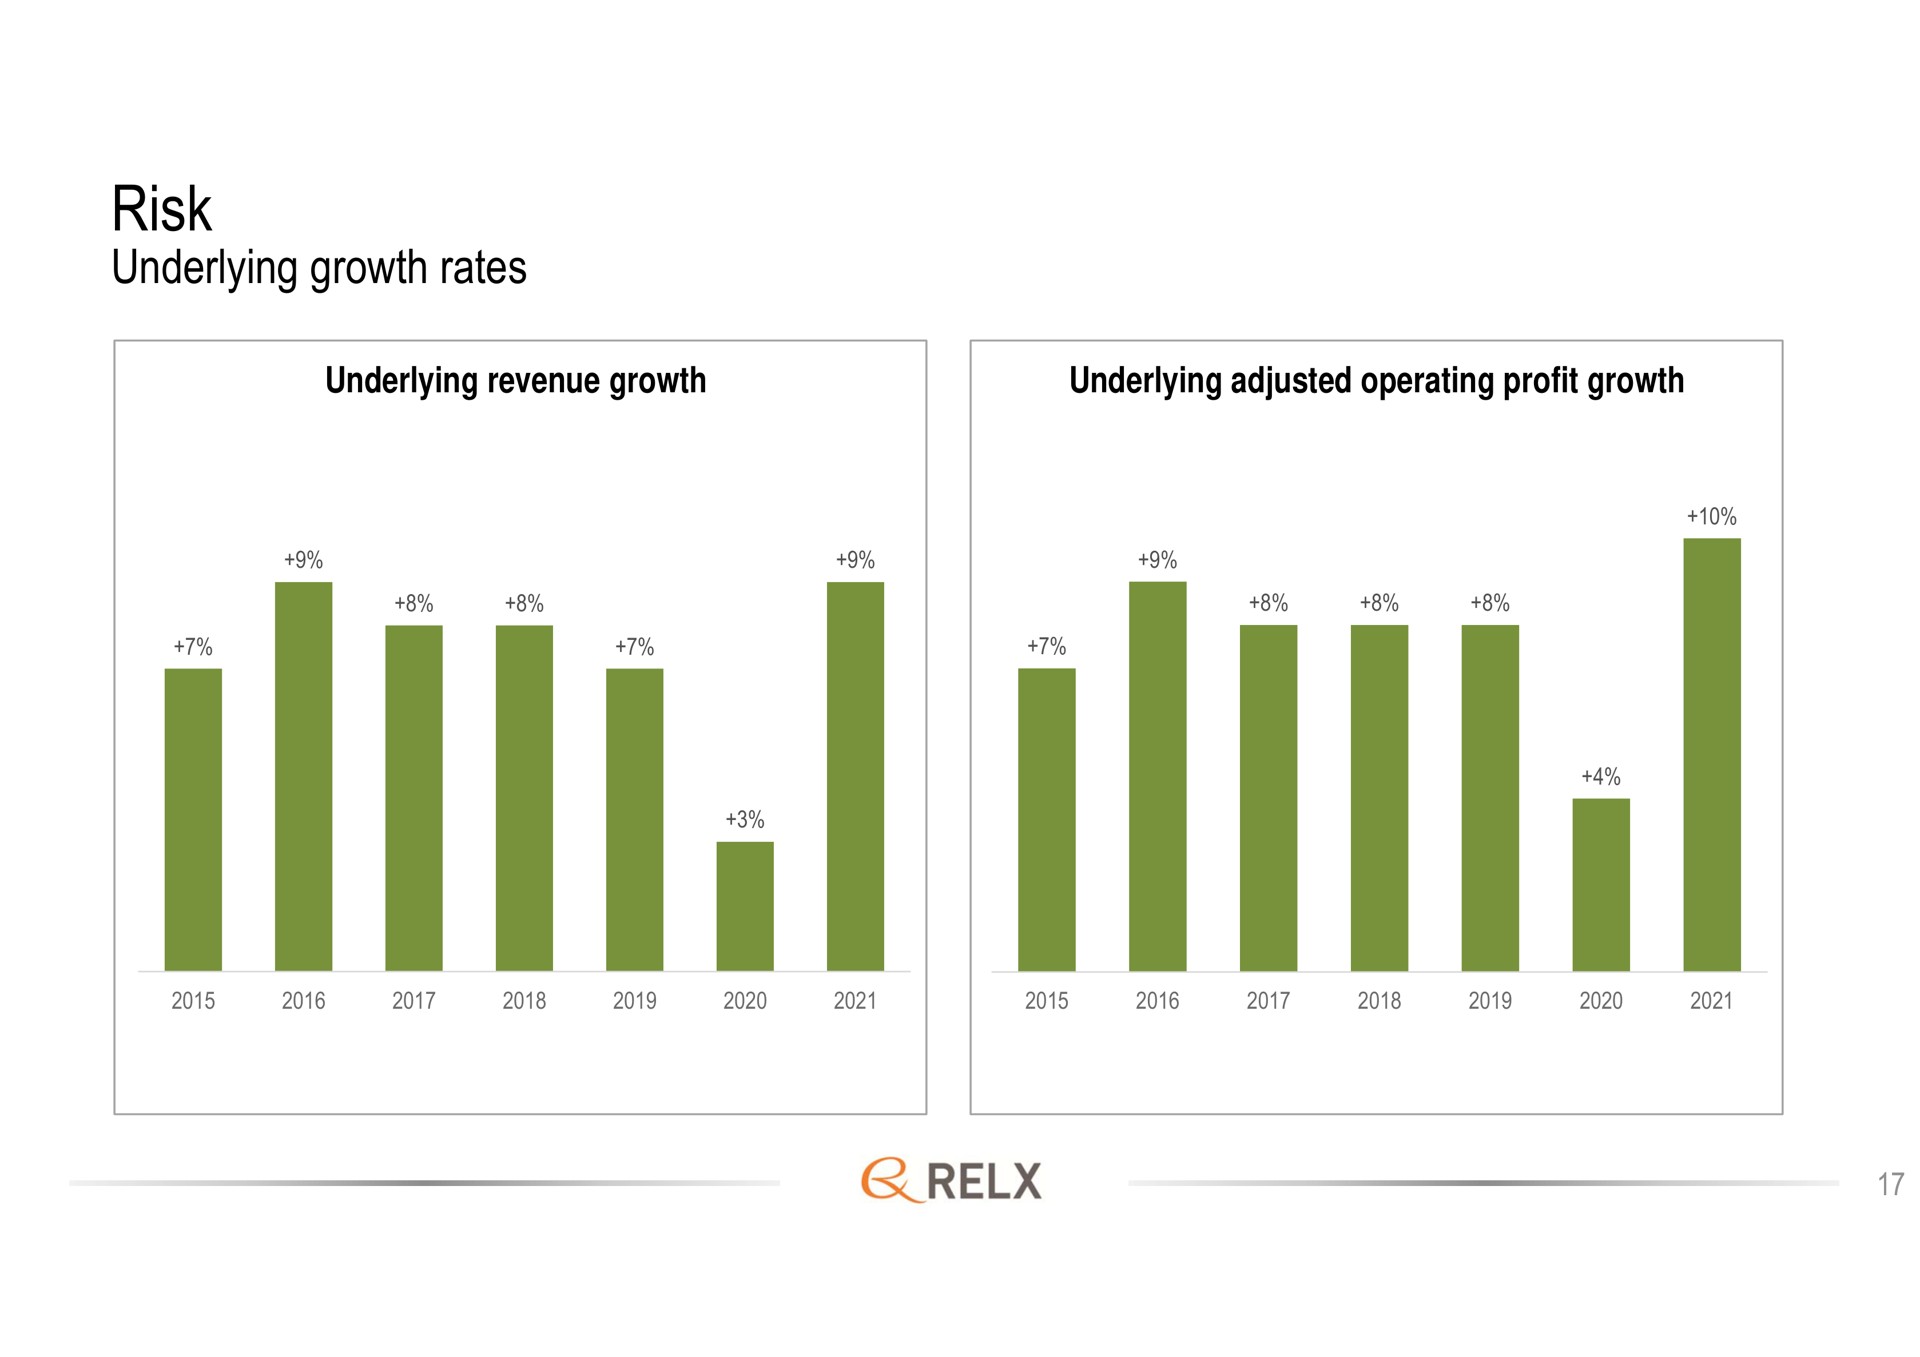 risk underlying growth rates | RELX